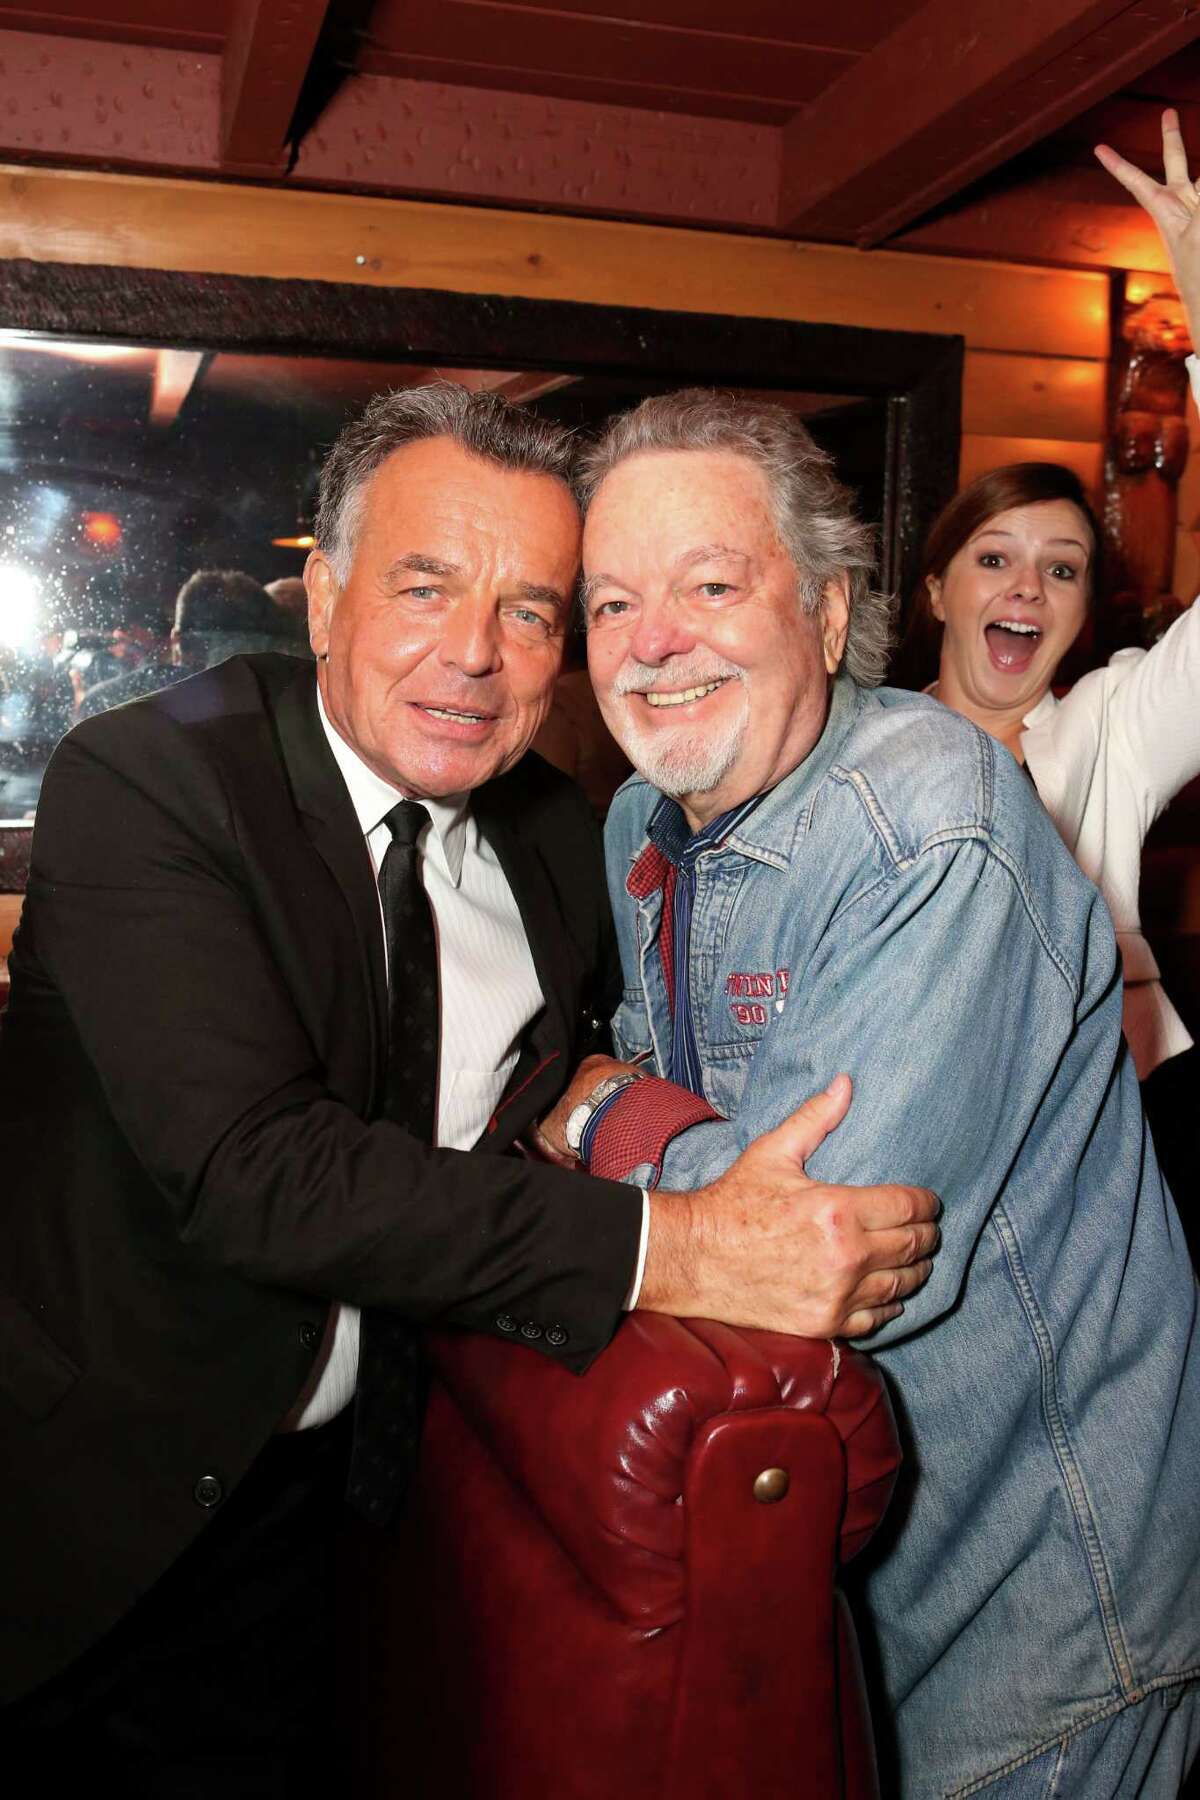 IMAGE DISTRIBUTED FOR PARAMOUNT - From left, Ray Wise, Russ Tamblyn and Amber Tamblyn at the Bigfoot Lodge for the after party celebrating the forthcoming Blu-ray Disc release of Twin Peaks: The Entire Mystery on Wednesday, July 16, 2014, in Los Angeles. (Photo by Casey Rodgers/Invision for CBS HE and Paramount/AP Images) ORG XMIT: INVL